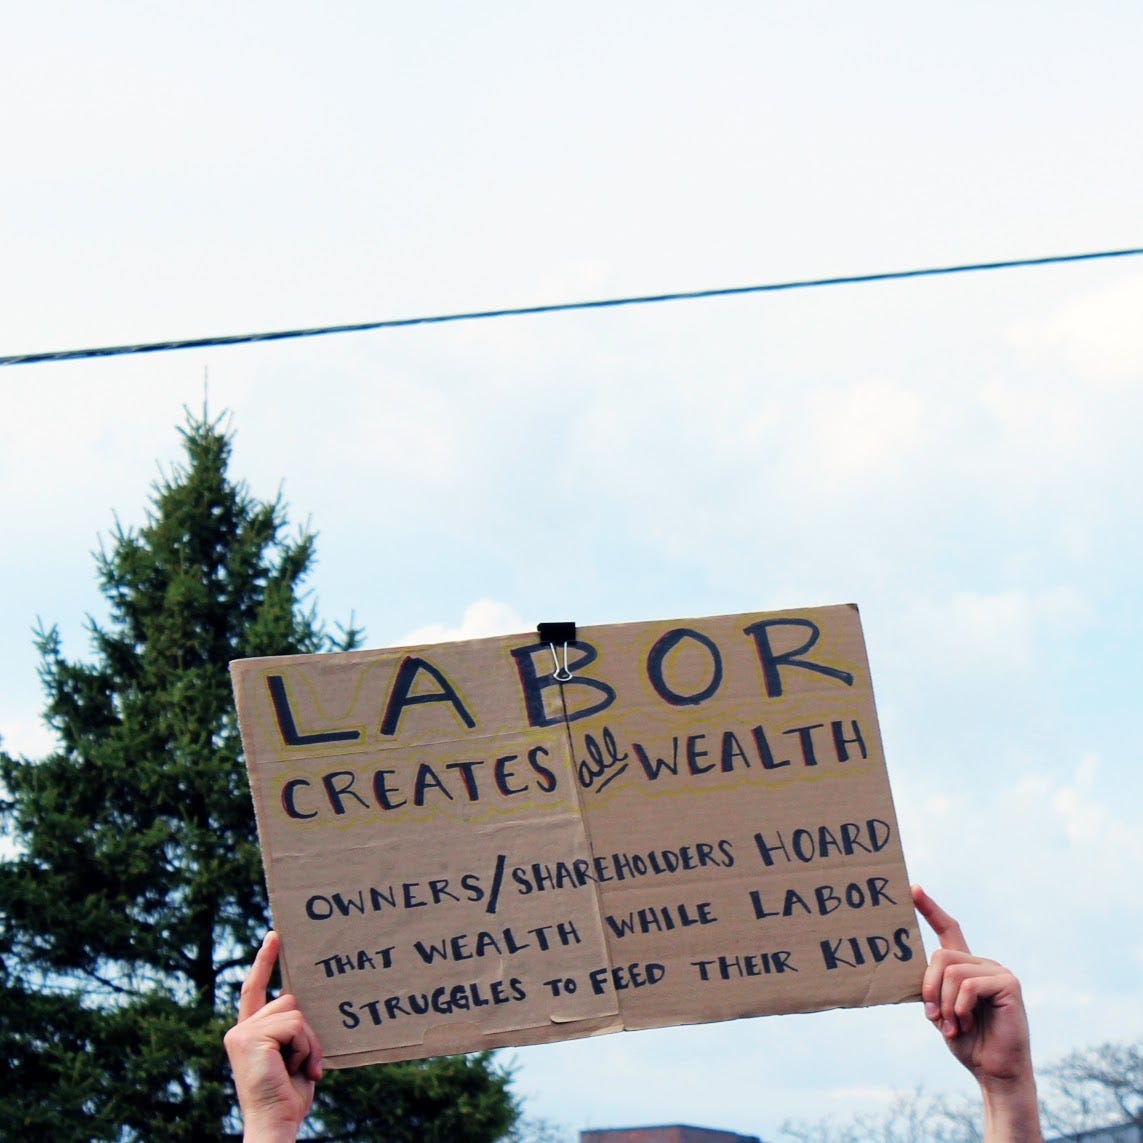 hands holding up a cardboard sign with text reading "LABOR creates all wealth, owners/shareholders hoard that wealth while labor struggles to feed their kids"